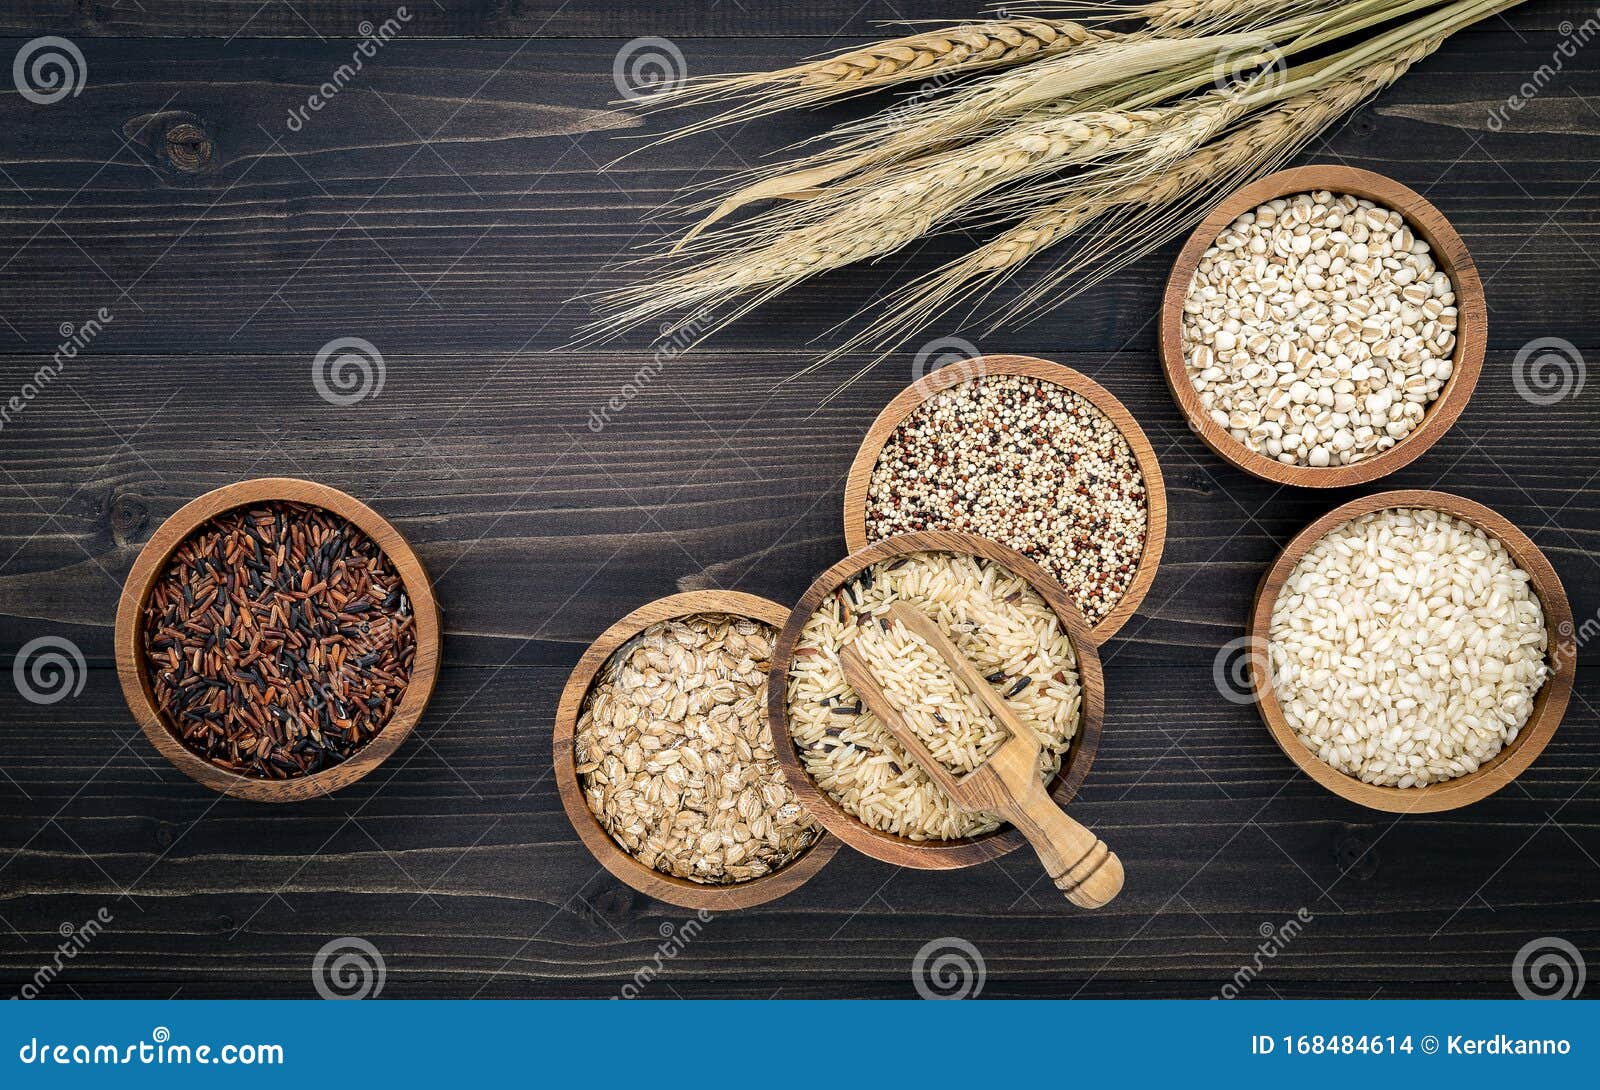 various natural organic cereal and whole grains seed in wooden bowl for healthy food ingredient product concept